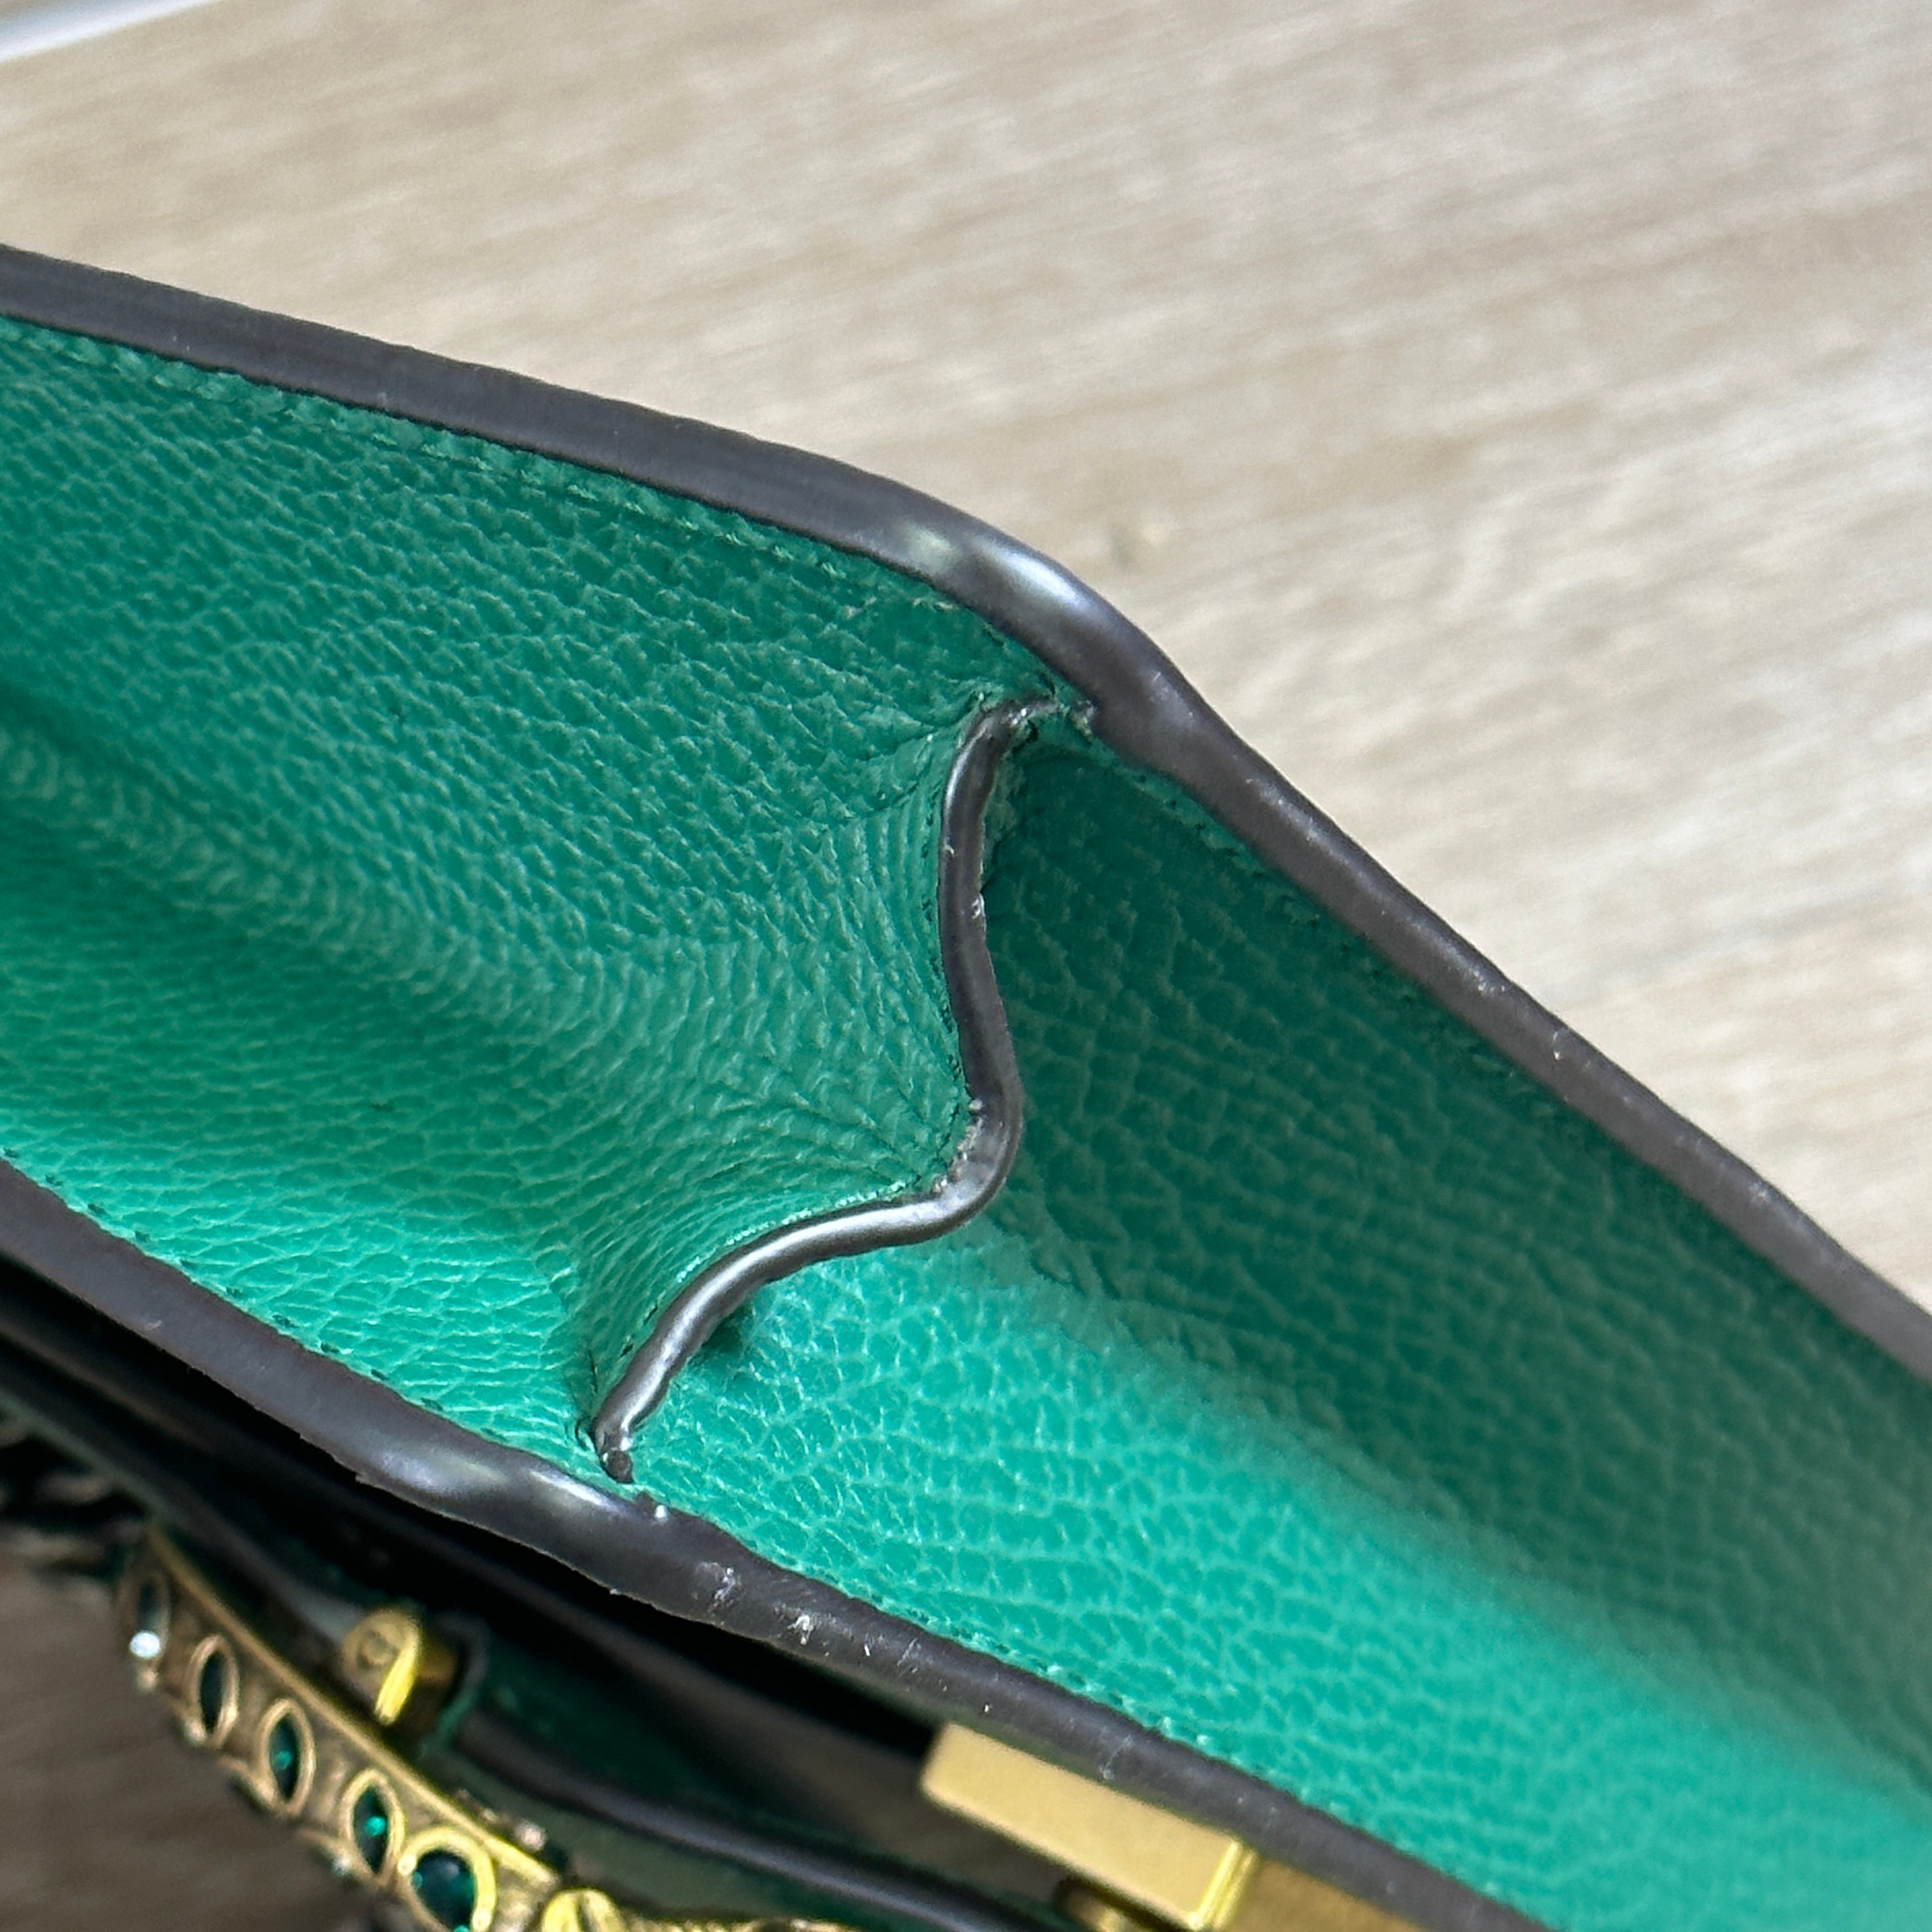 Gucci Dionysus Shoulder Bag Small Emerald in Pebbled Calfskin with  Gold-tone/Silver-tone - US